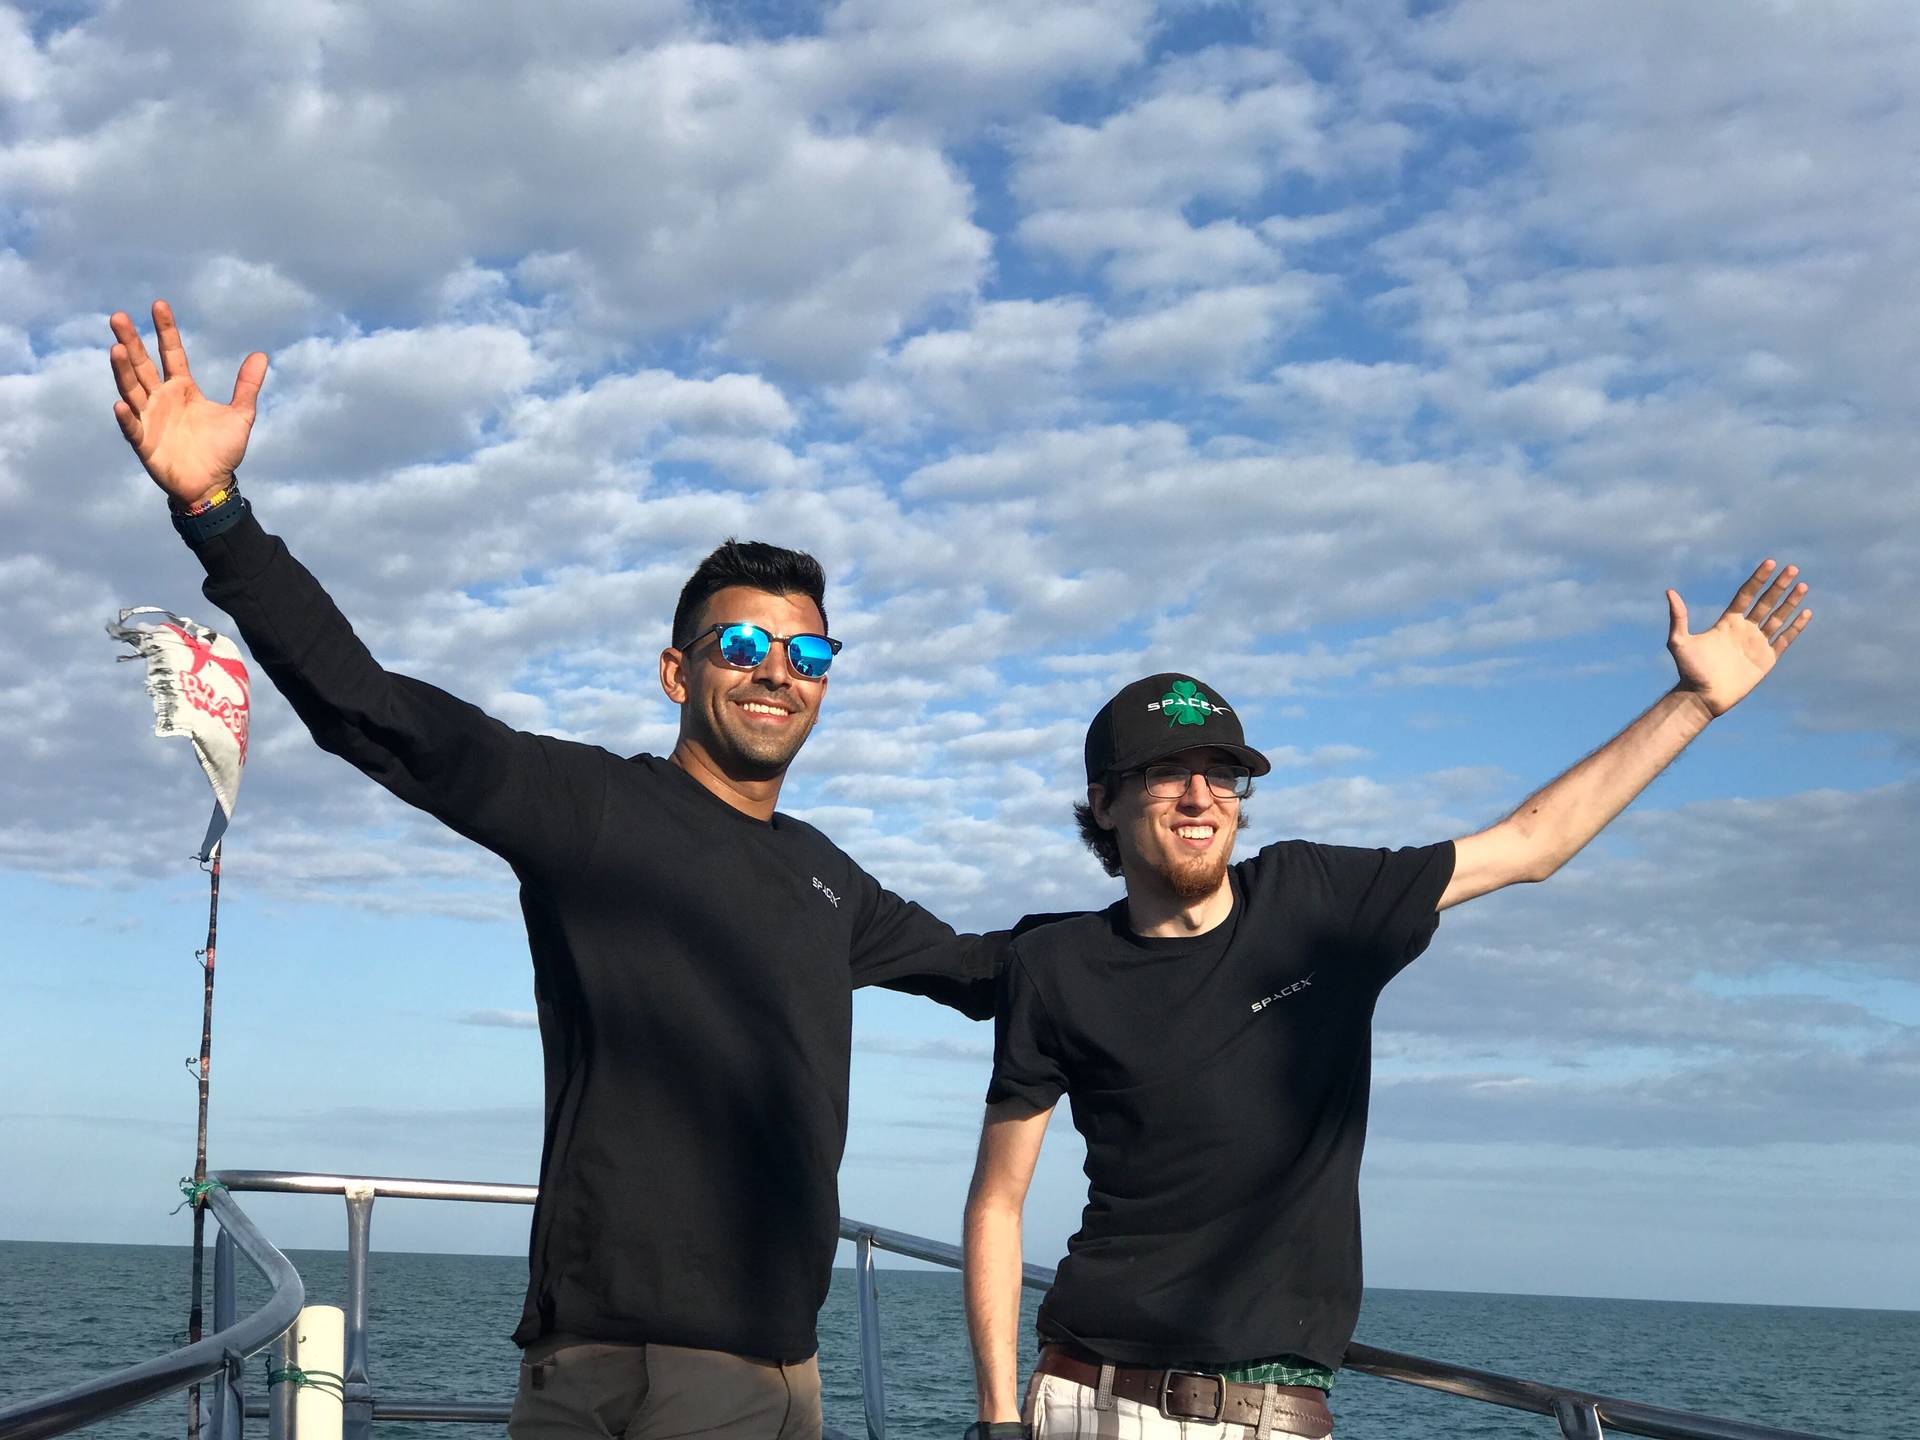 Photograph of CAM and Steven on the boat with their arms spread in a greeting